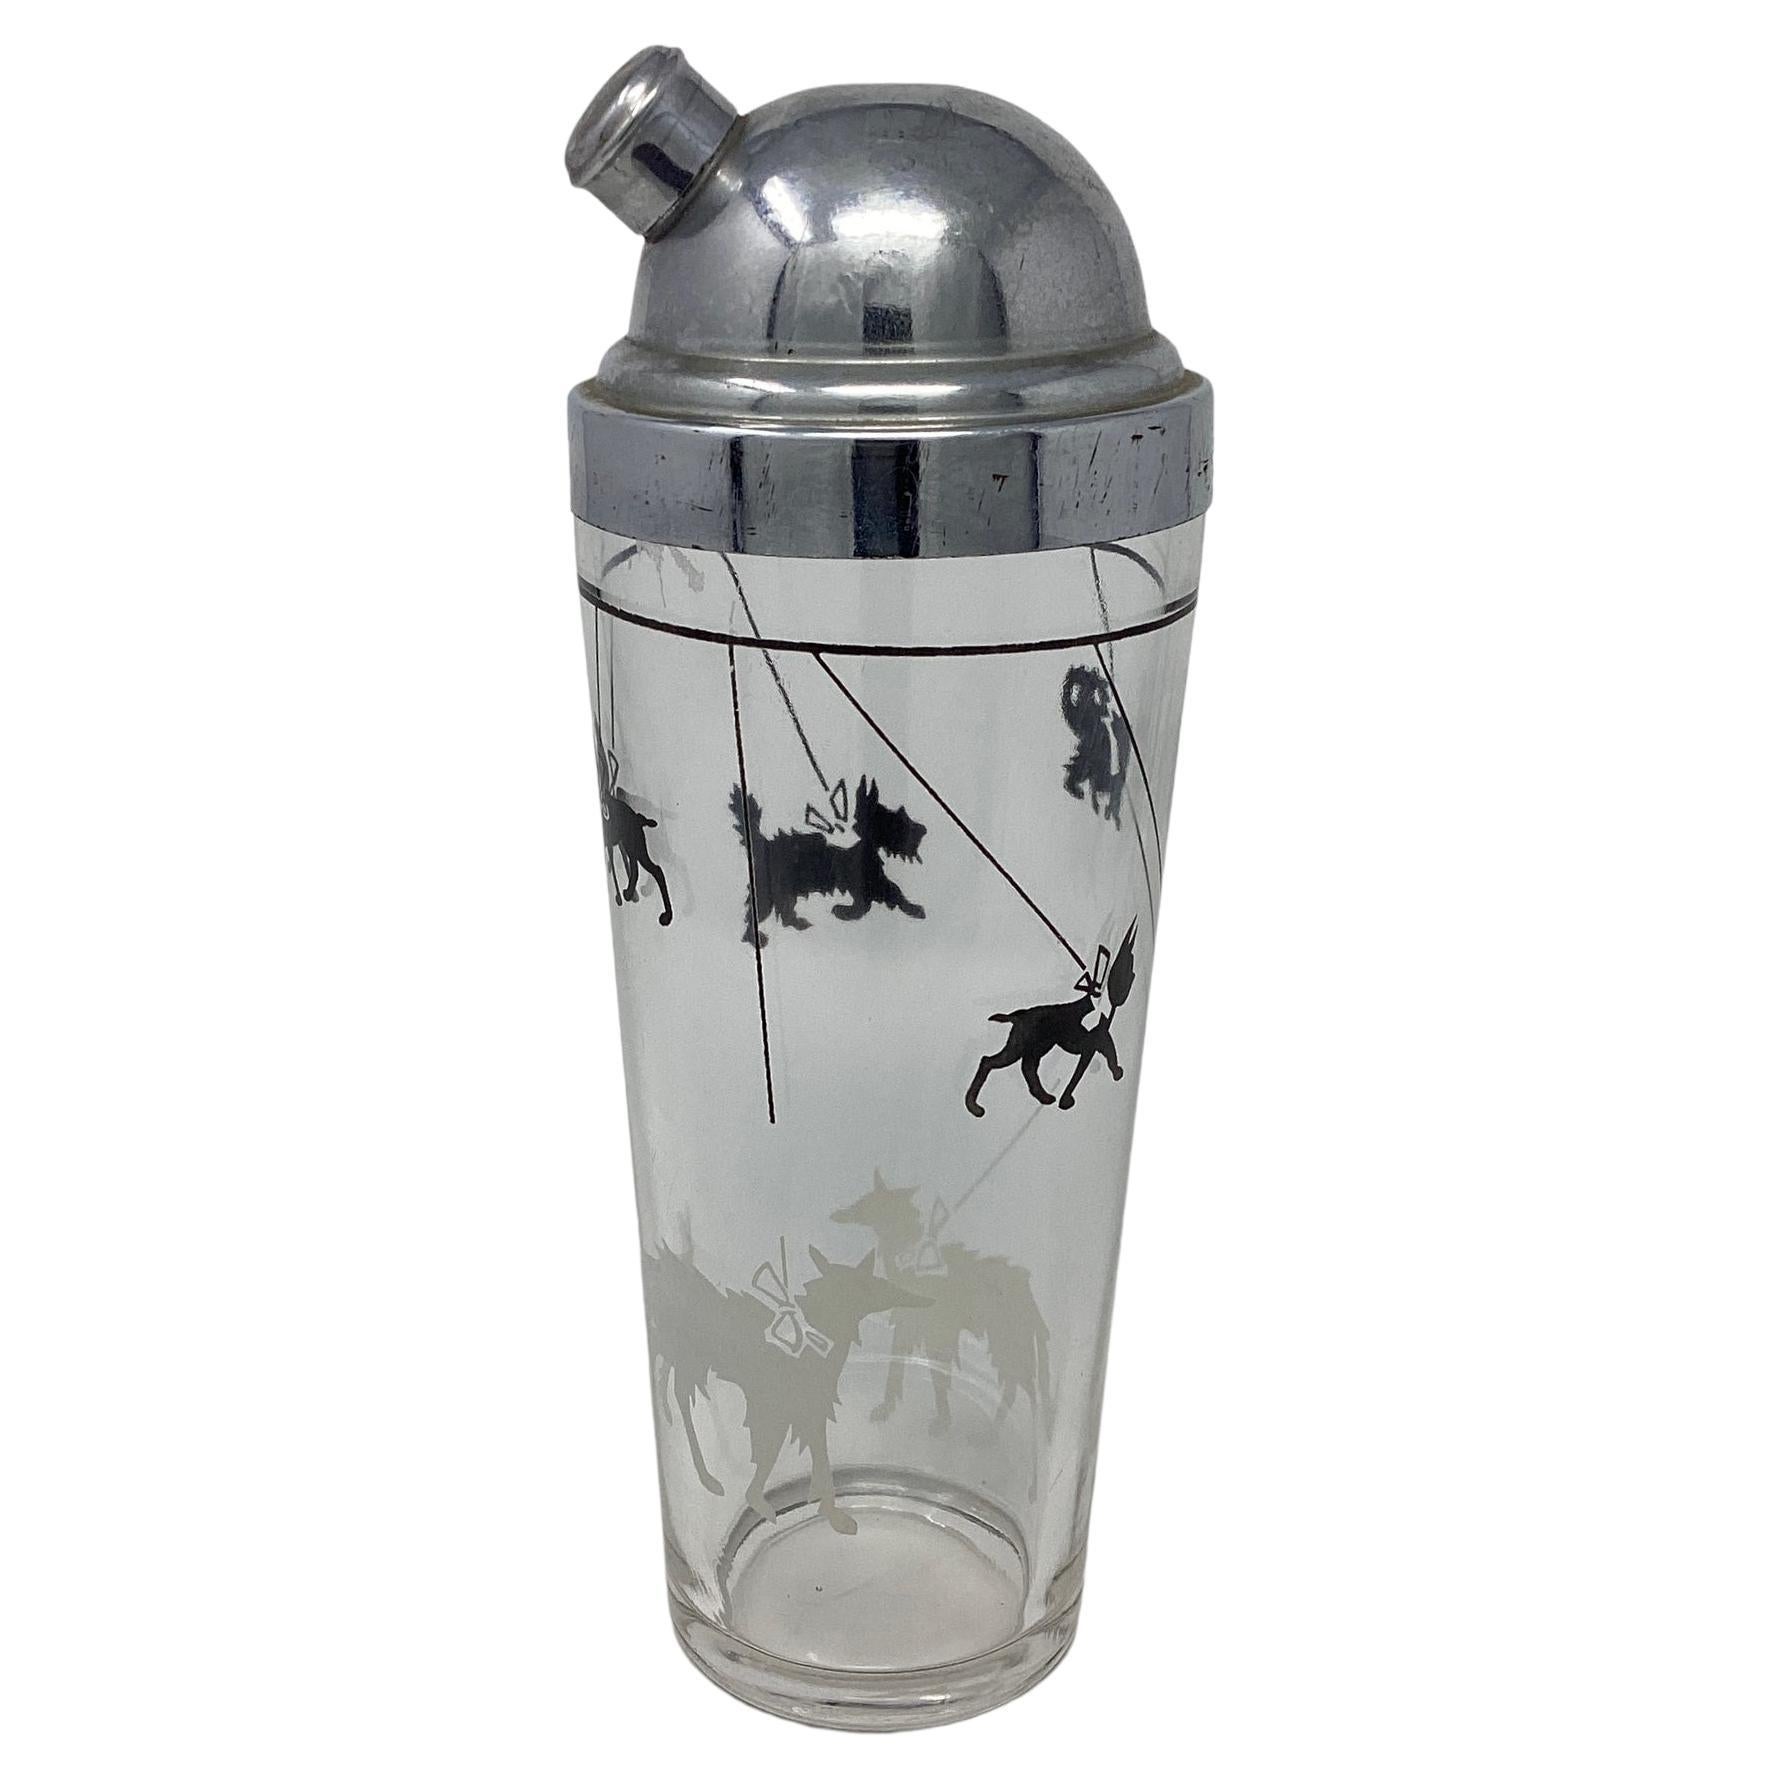 Art Deco Hazel-Atlas Cocktail Shaker with Leashed Dogs For Sale